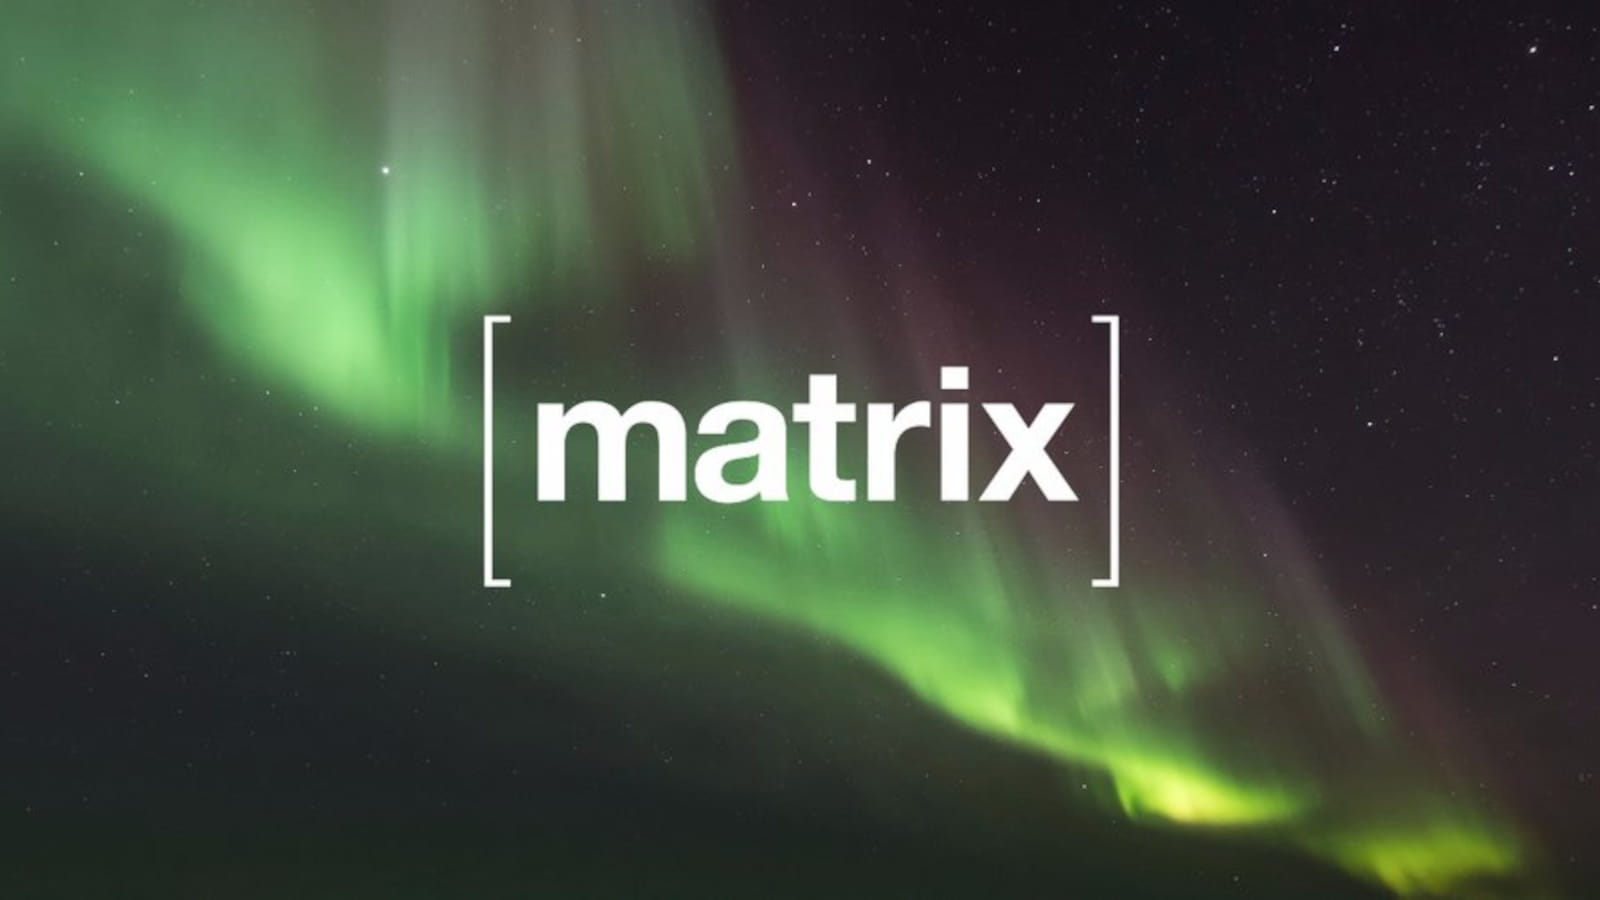 Matrix: Install security update to fix end-to-end encryption flaws